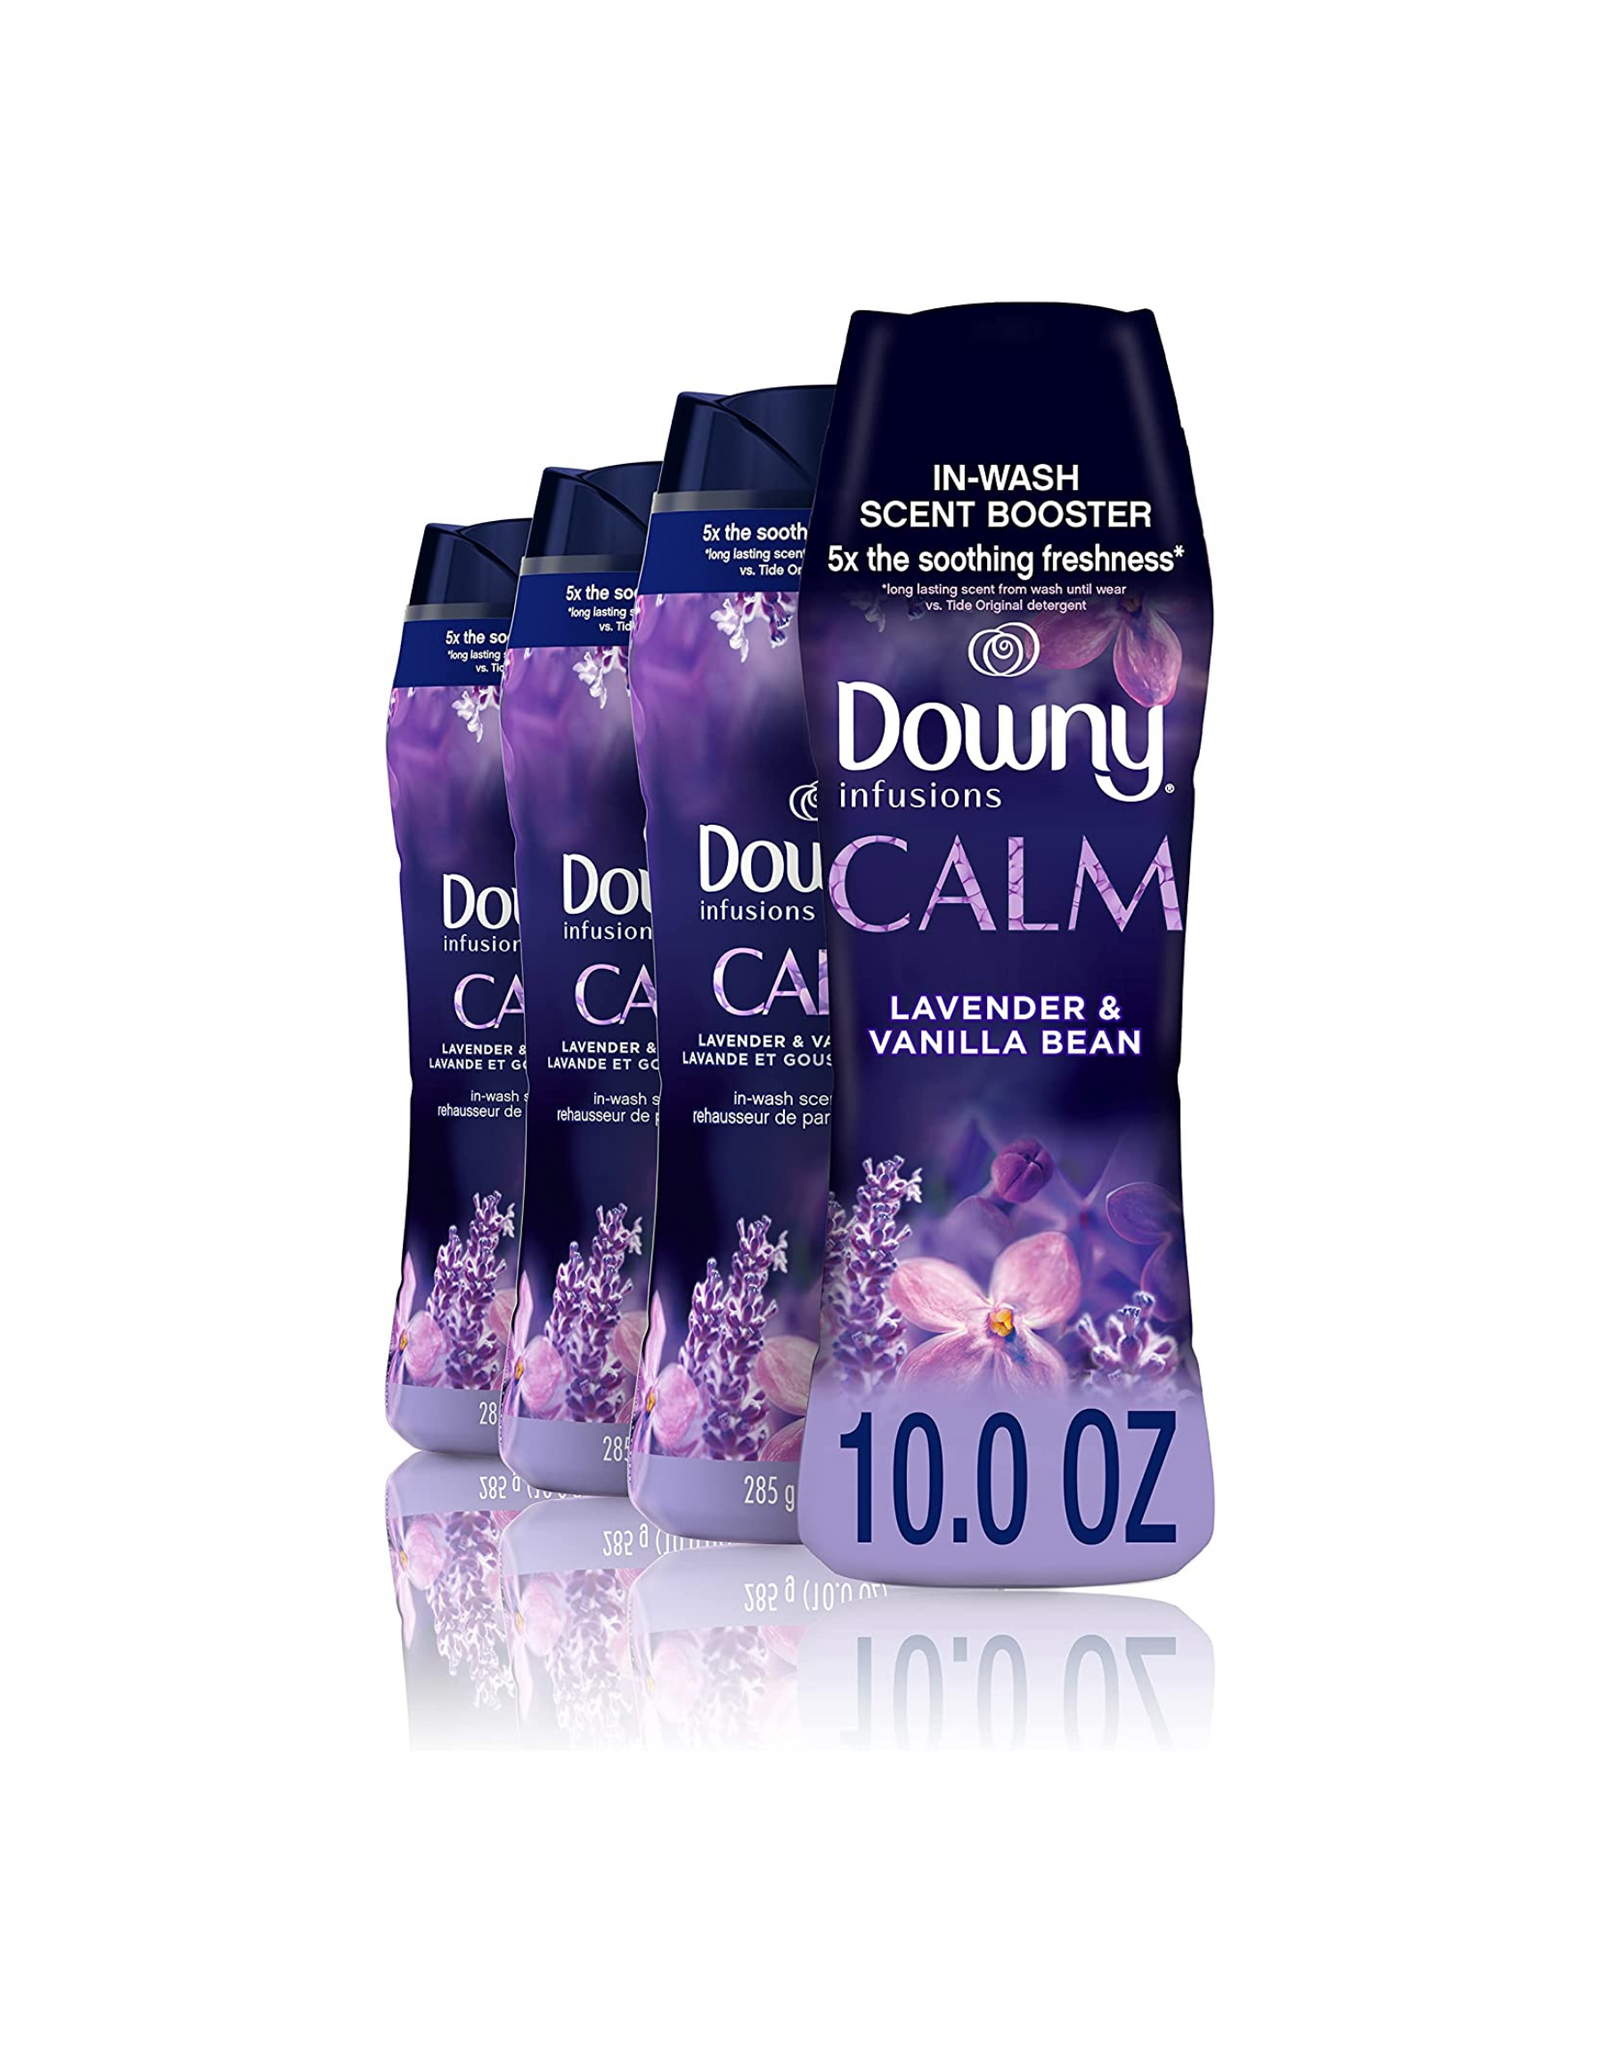 Downy Infusions in-Wash Calm, Lavender & Vanilla Bean, 10 oz, 4 Ct